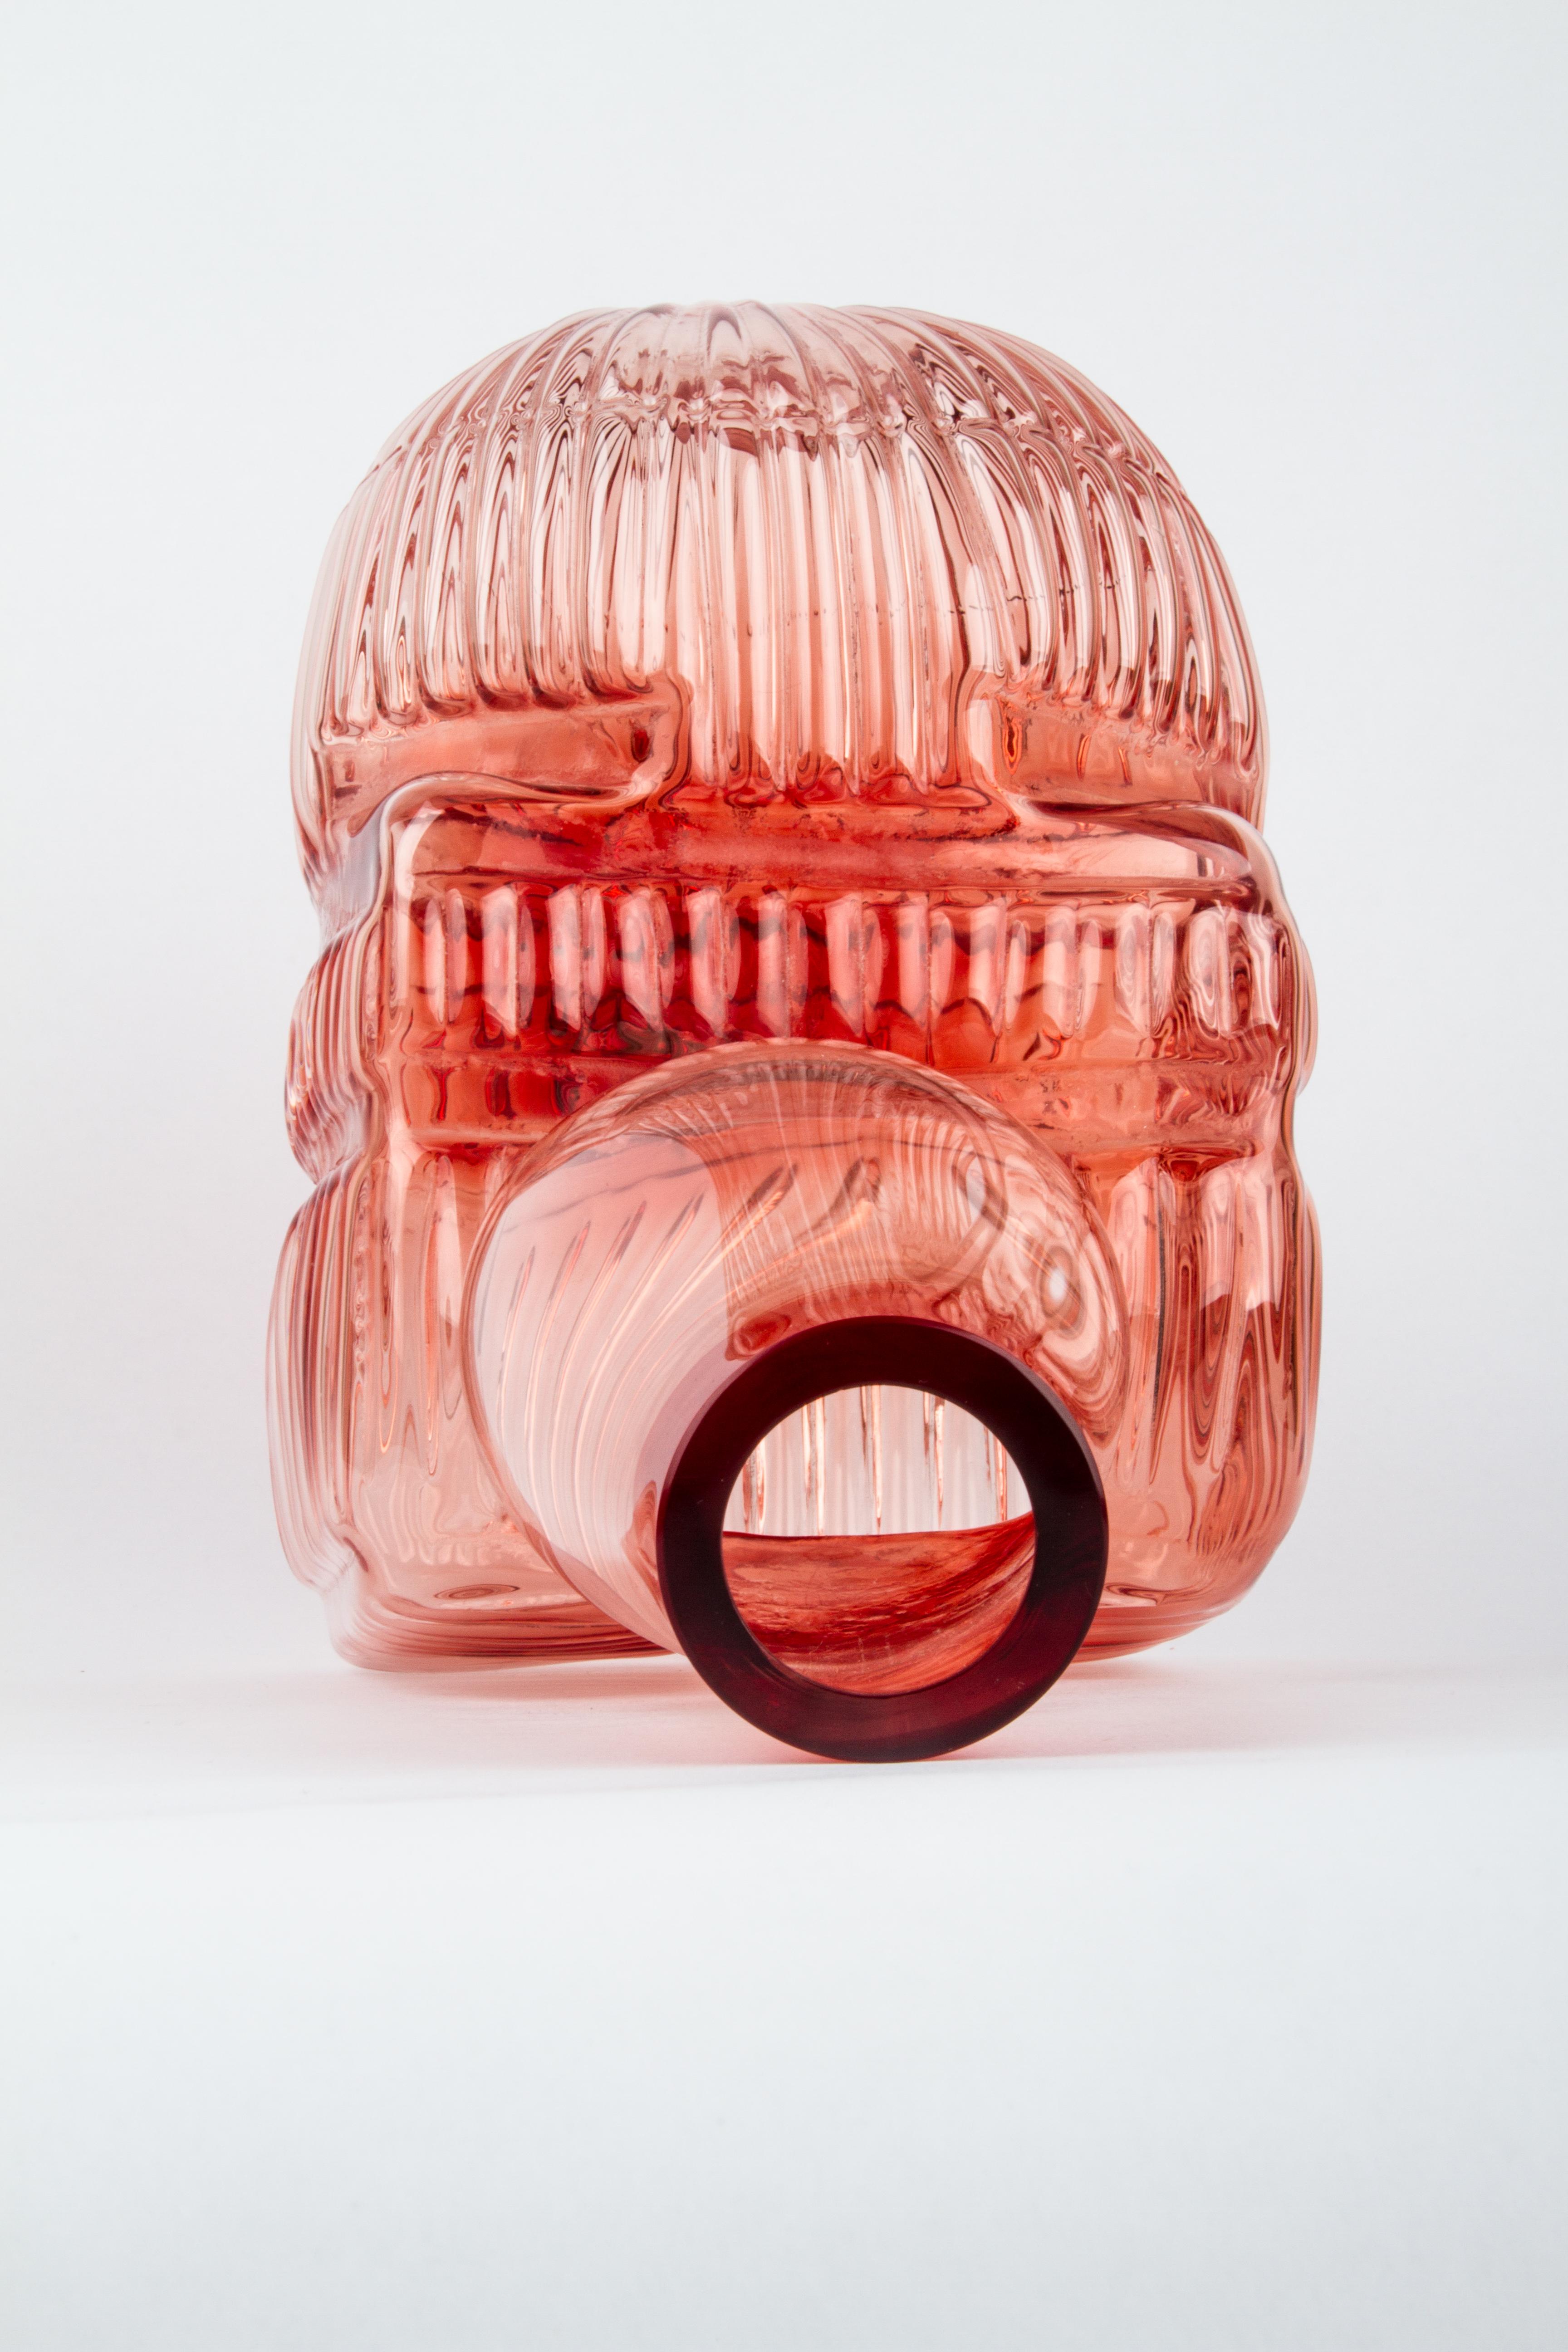 This piece is part of the Out of the Cage Collection, a unique project that was born experimentally in Mexico 11 years ago. 
Liquid glass is blown into various shapes and sizes of “molds” such as birdcages or baskets. The final object is the result